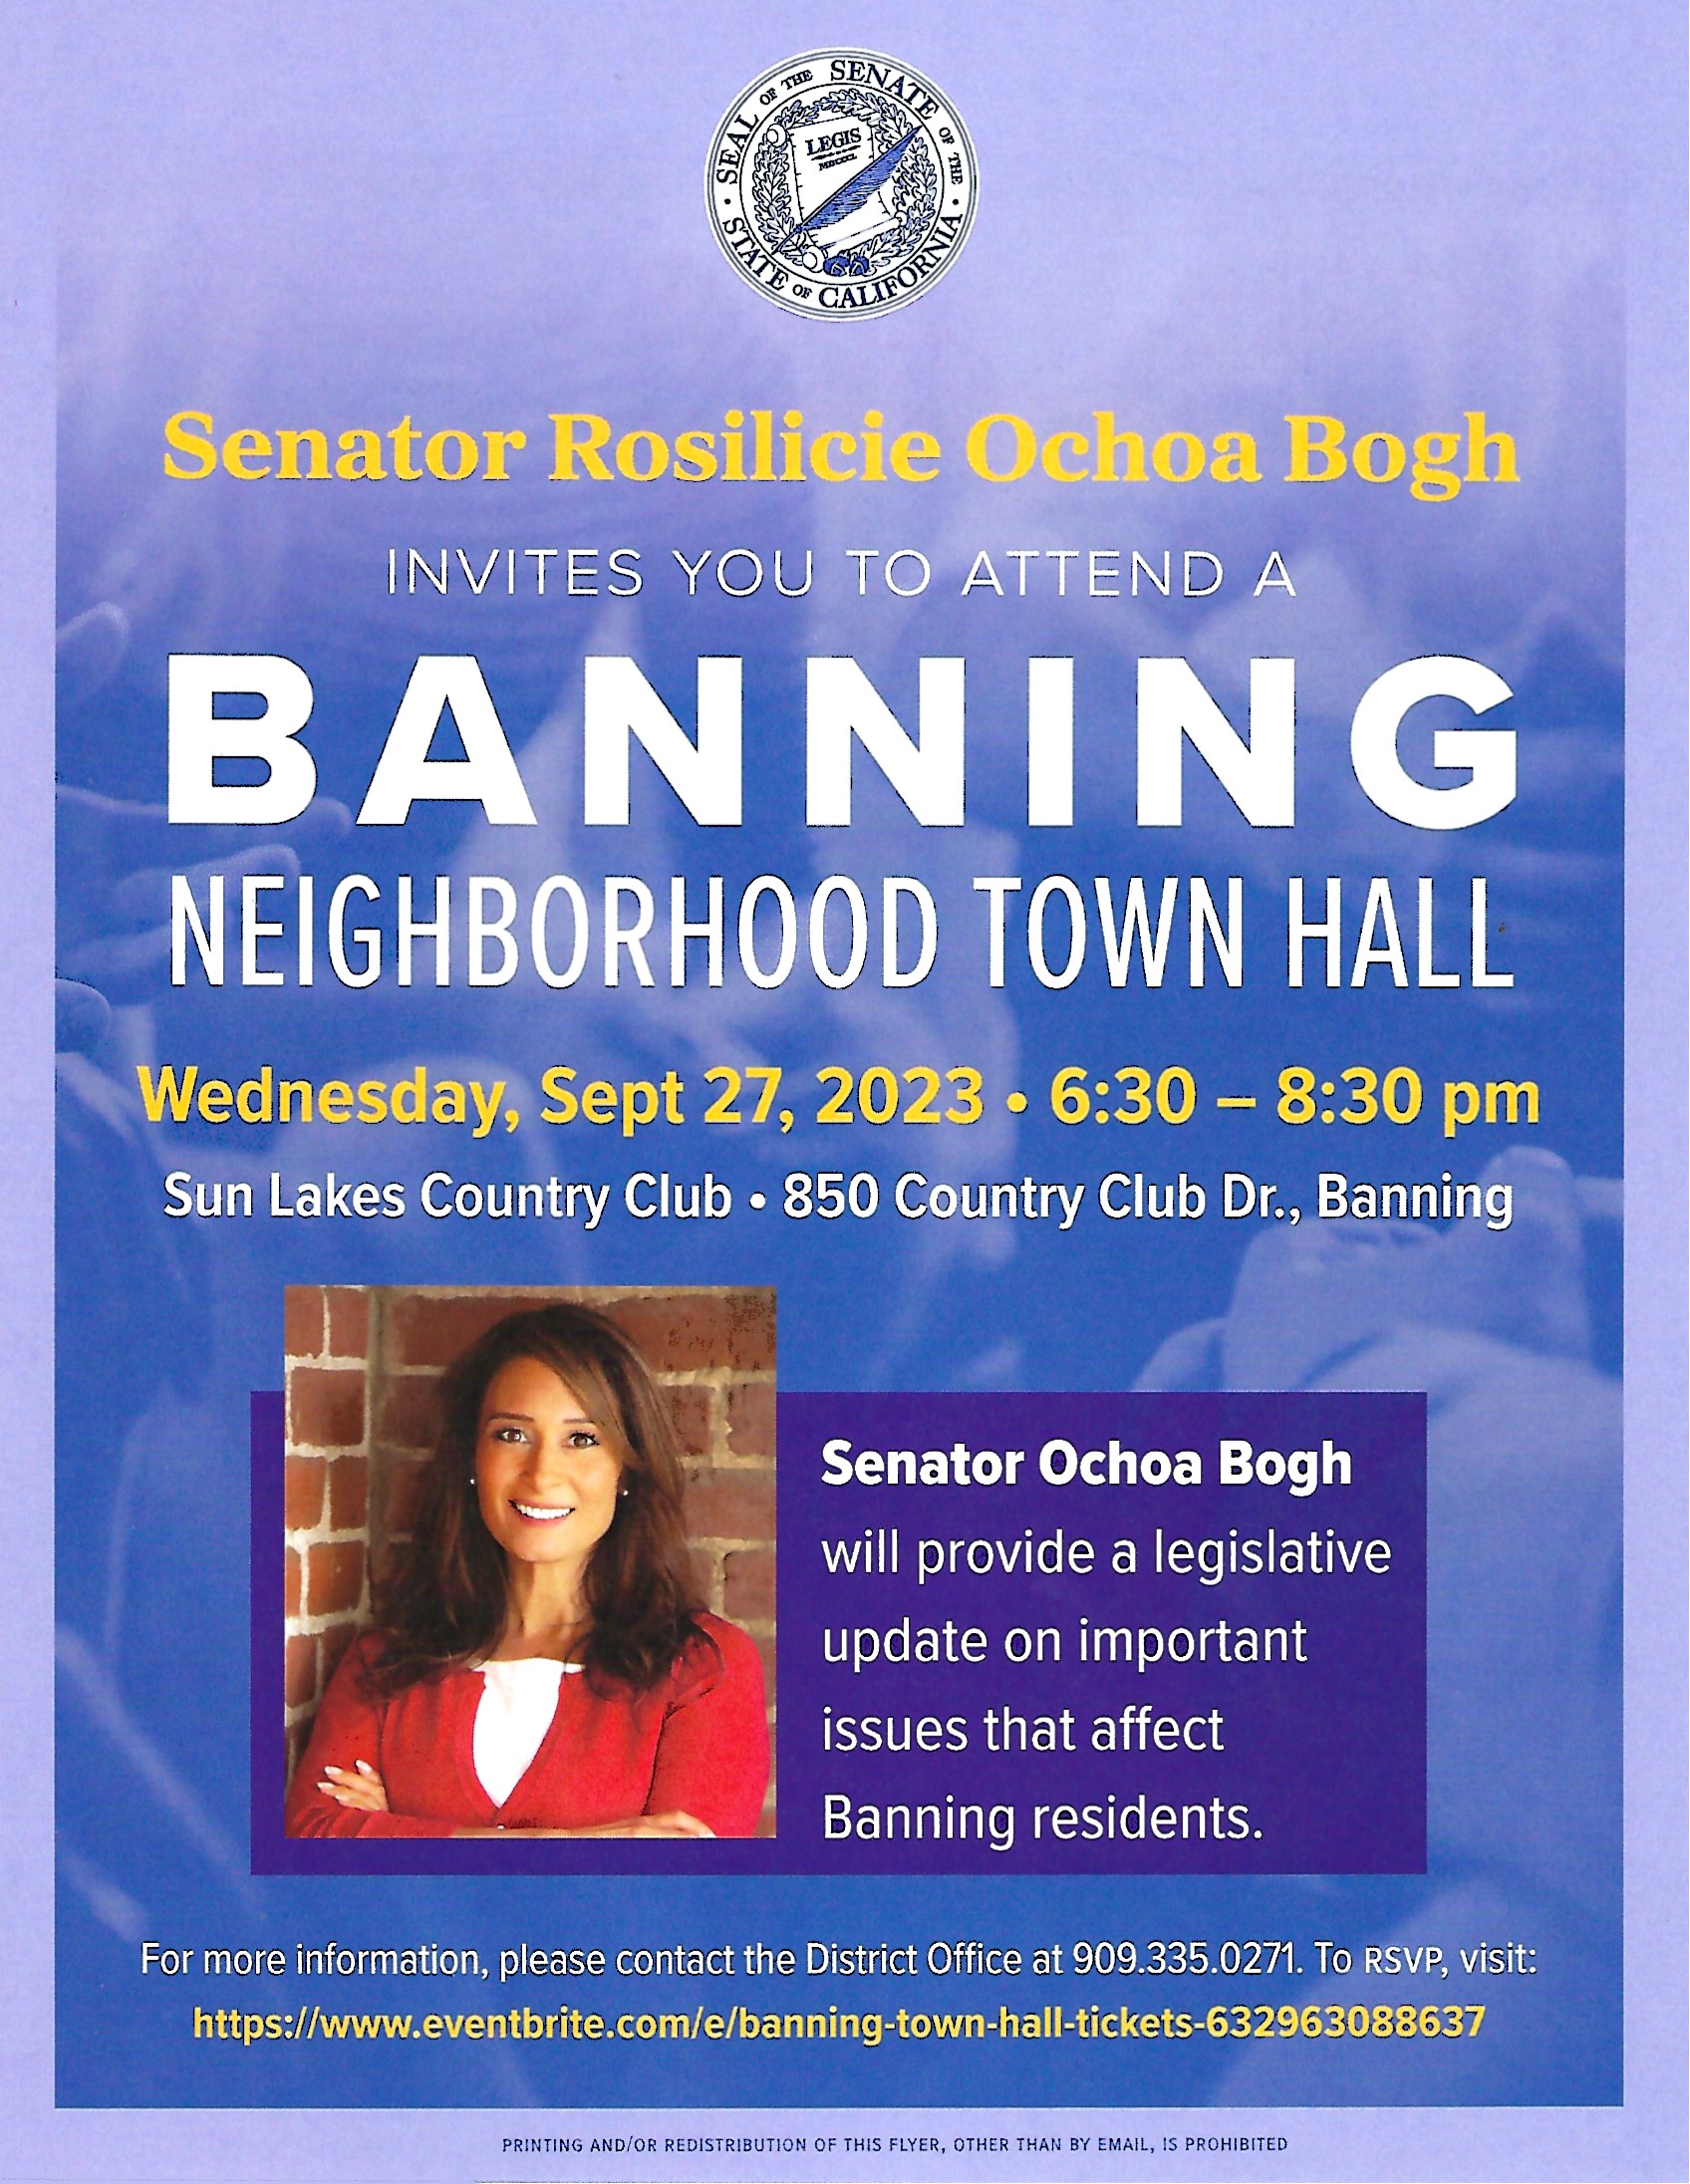 Banning Neighborhood Town Hall @ Sun Lakes Country Club | Banning | California | United States